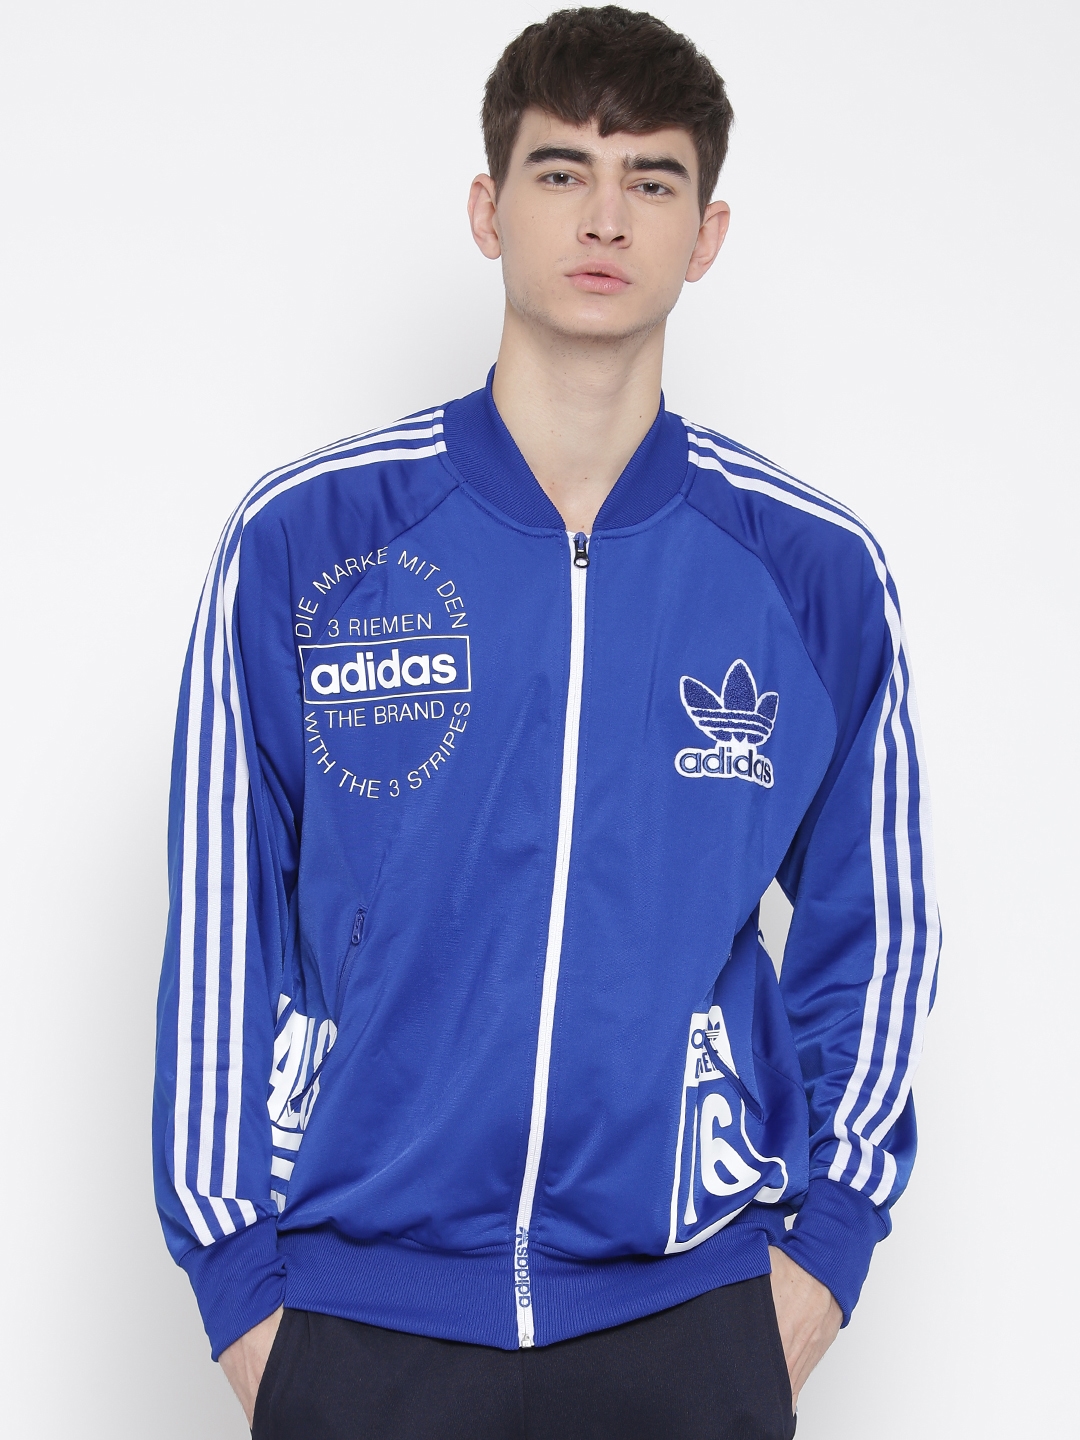 Details 90+ adidas lightweight track jacket latest - in.thdonghoadian